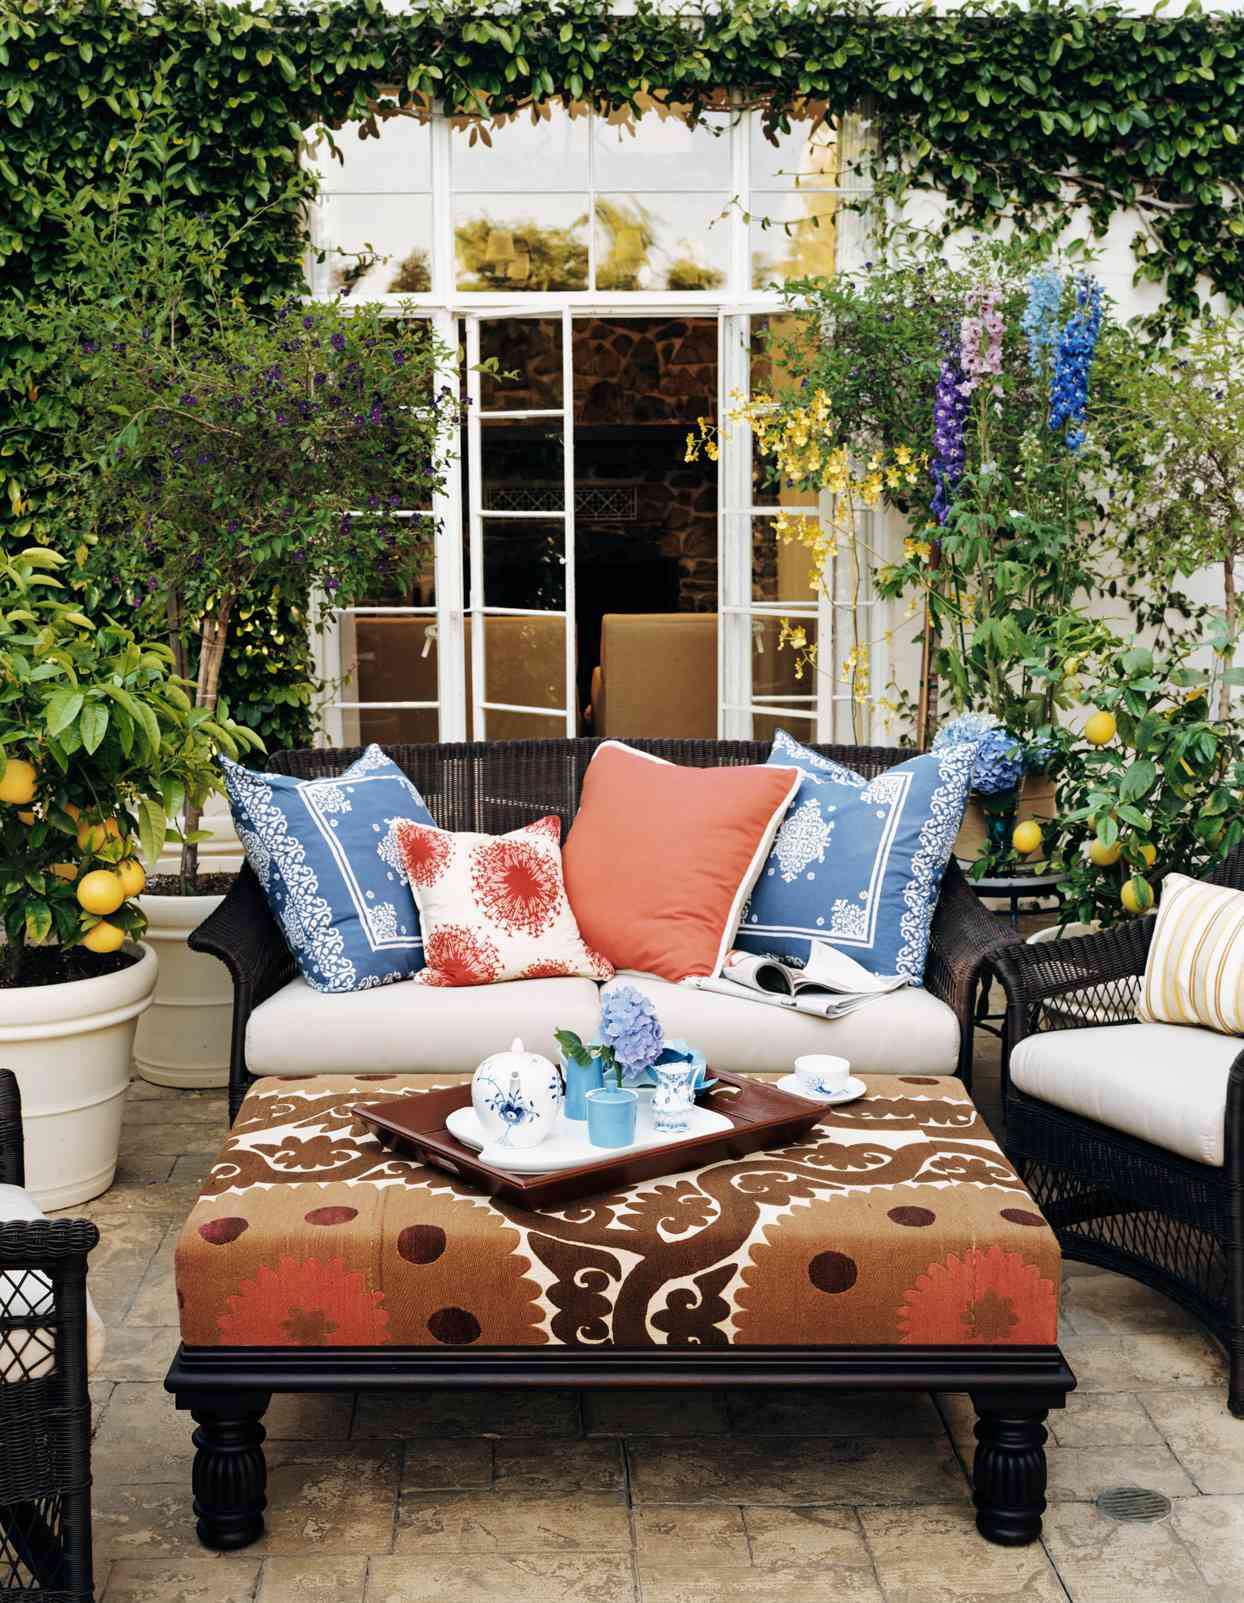 patterned outdoor patio furniture